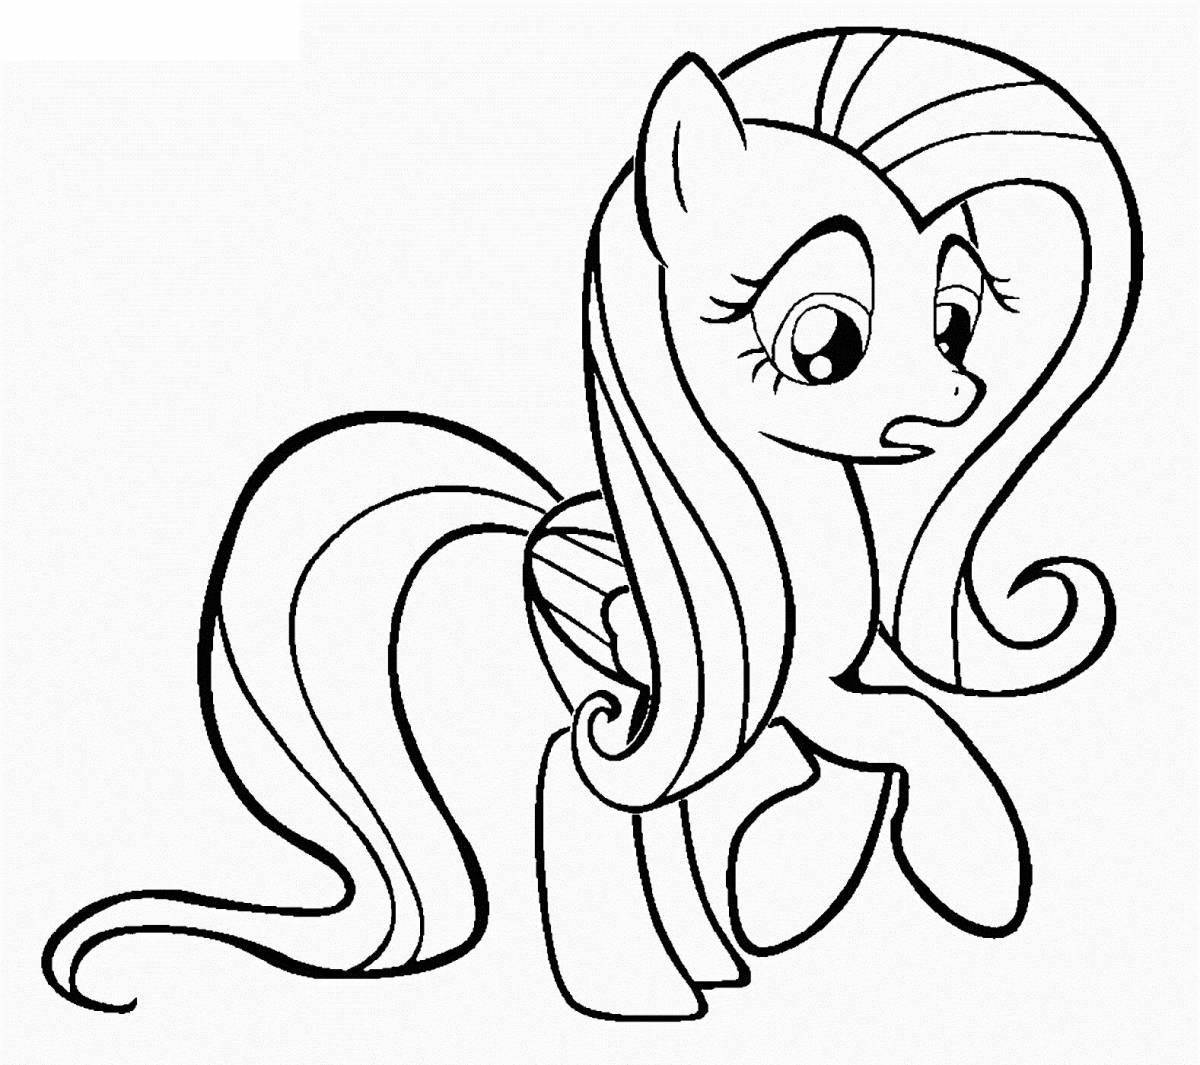 Coloring page cute pony watershine